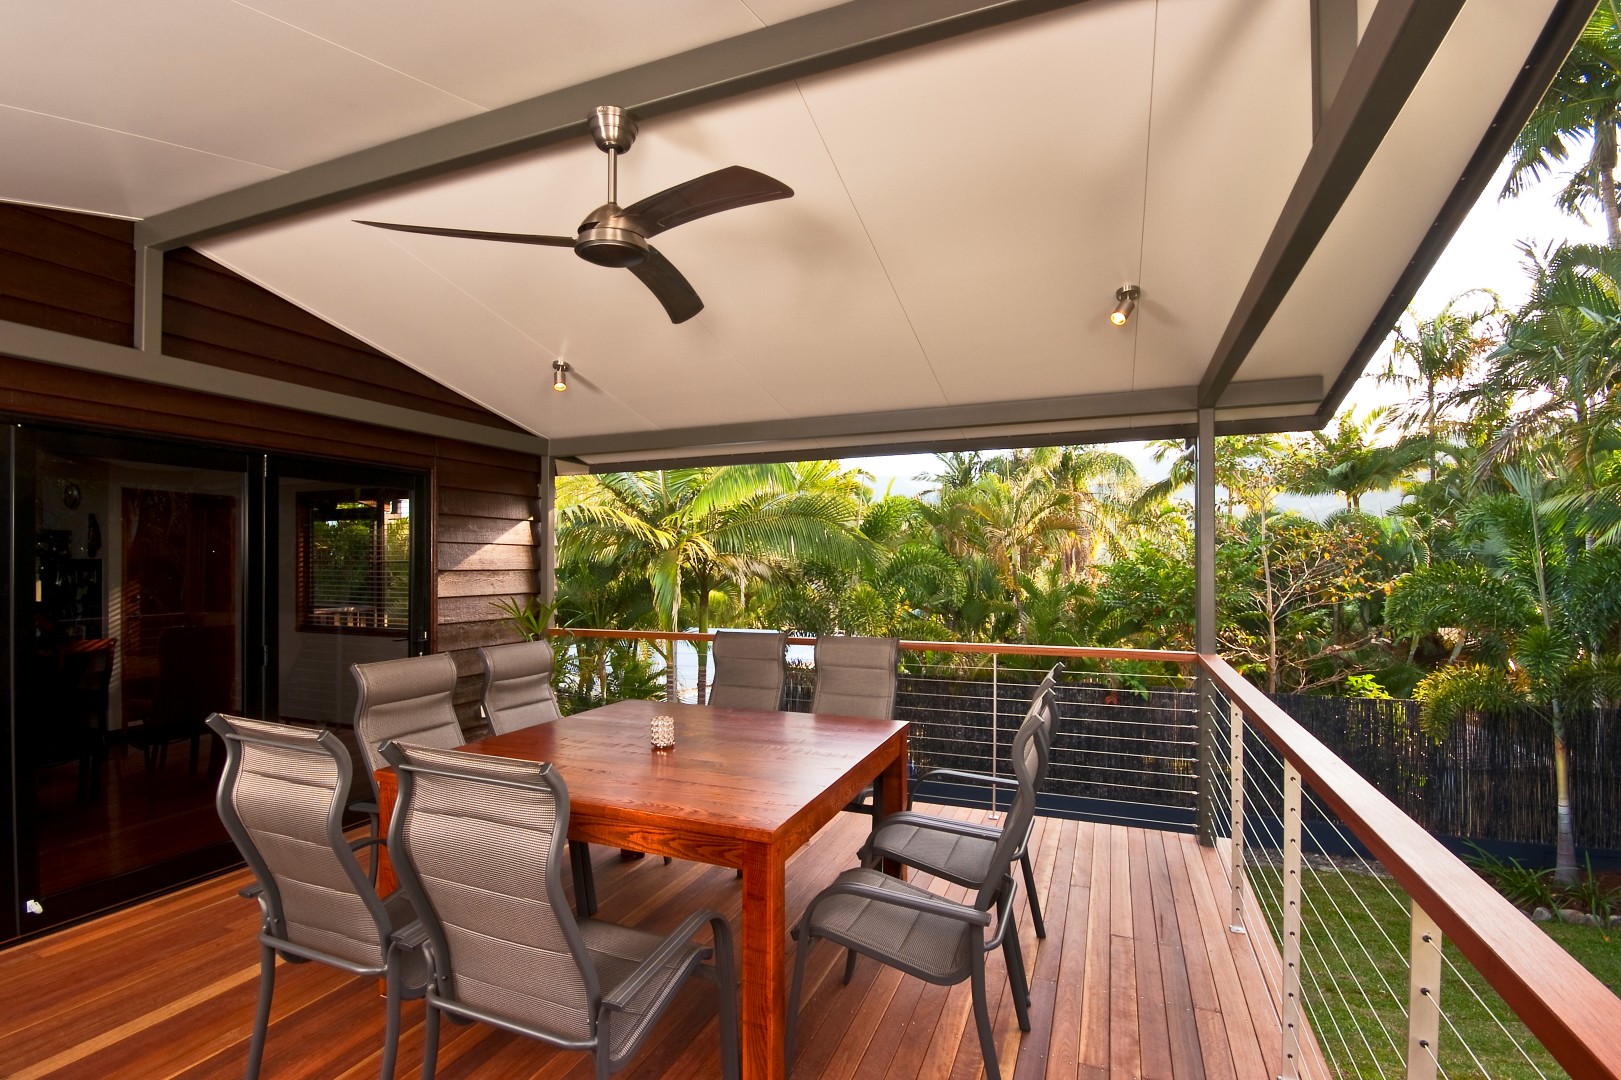 A wooden deck with outdoor furniture and a ceiling fan overlooking lush greenery, typical of Perth patios. Phoenix Patios, Cottages and Granny Flats in Perth